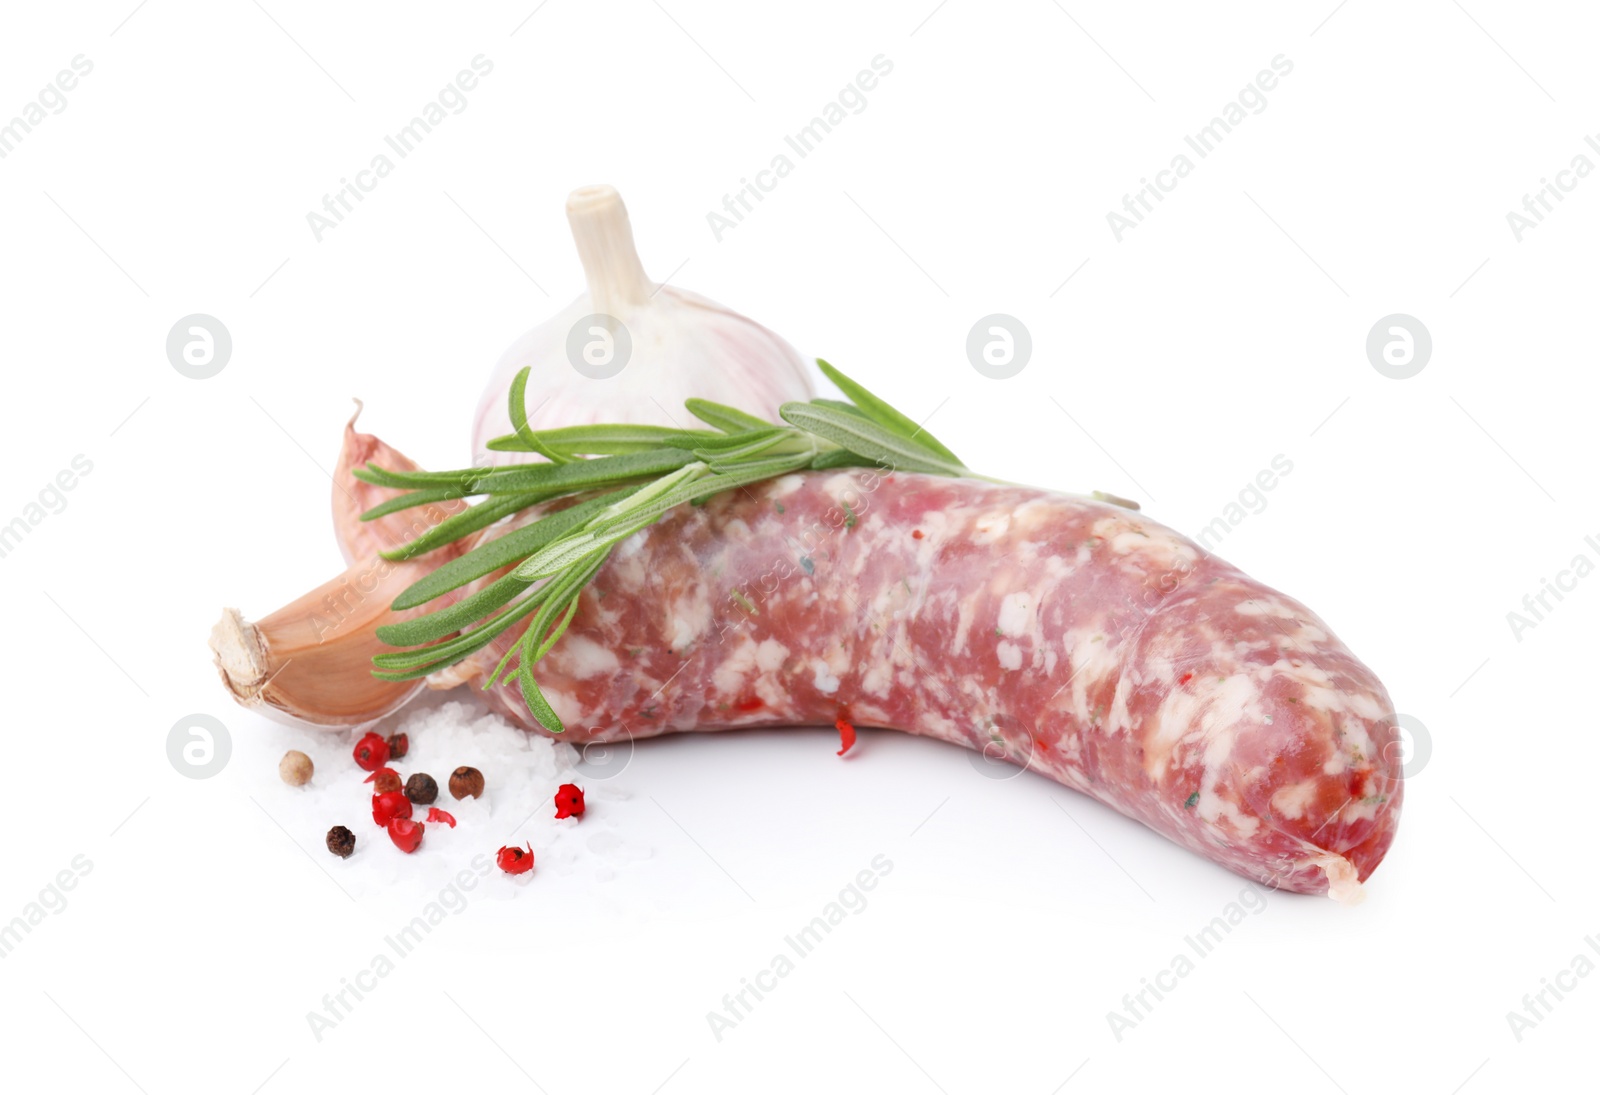 Photo of Raw homemade sausage and different spices isolated on white